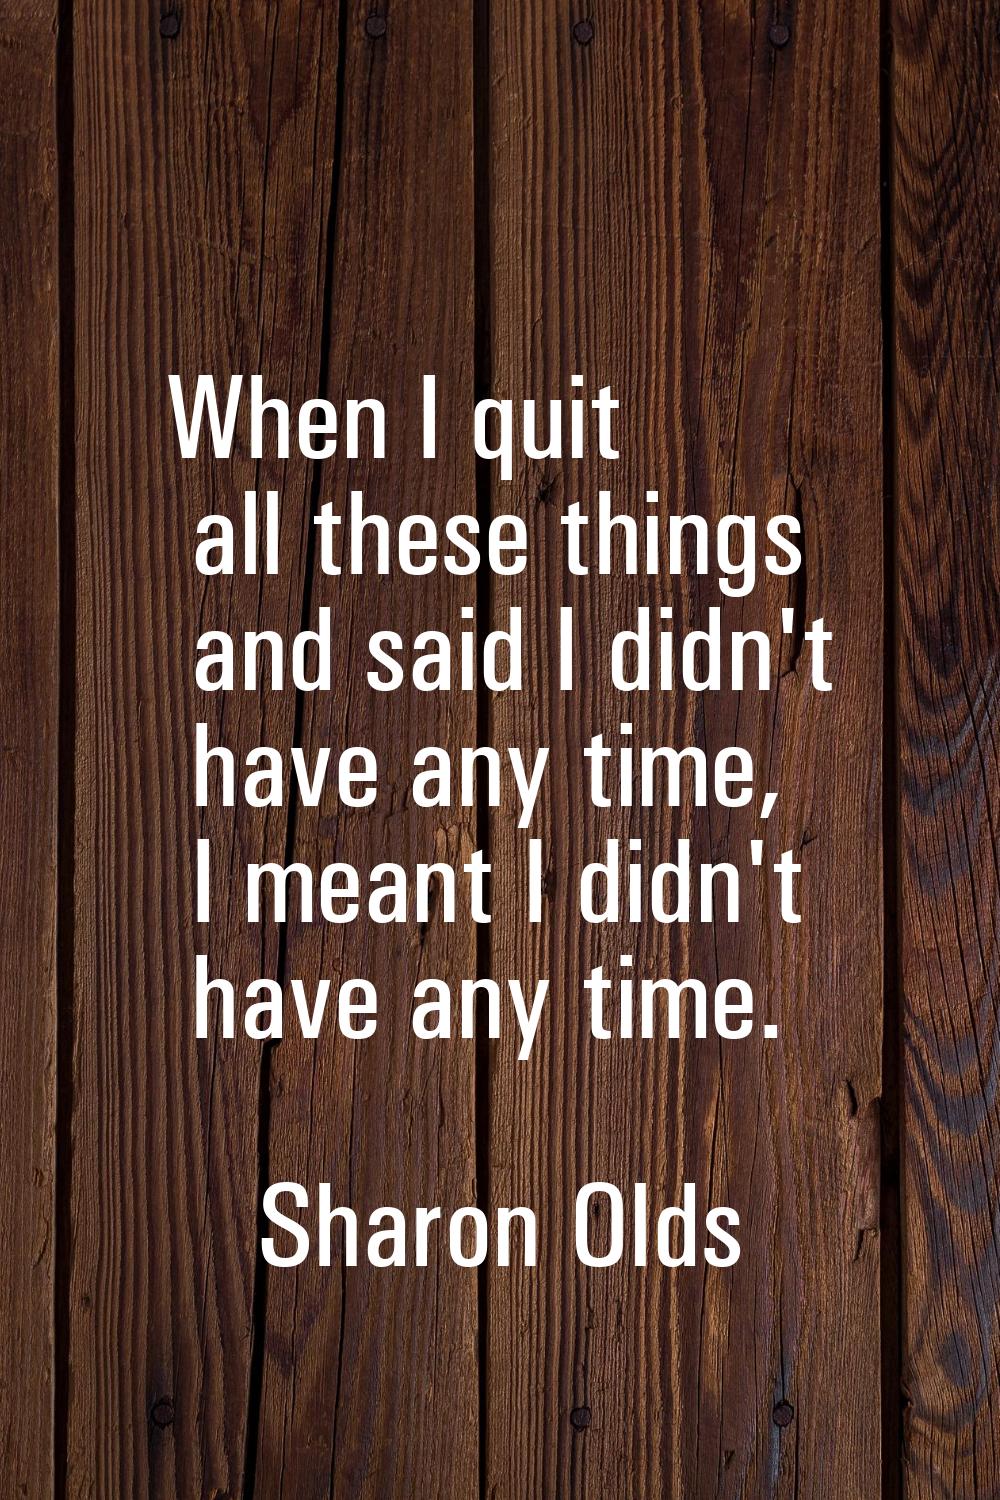 When I quit all these things and said I didn't have any time, I meant I didn't have any time.